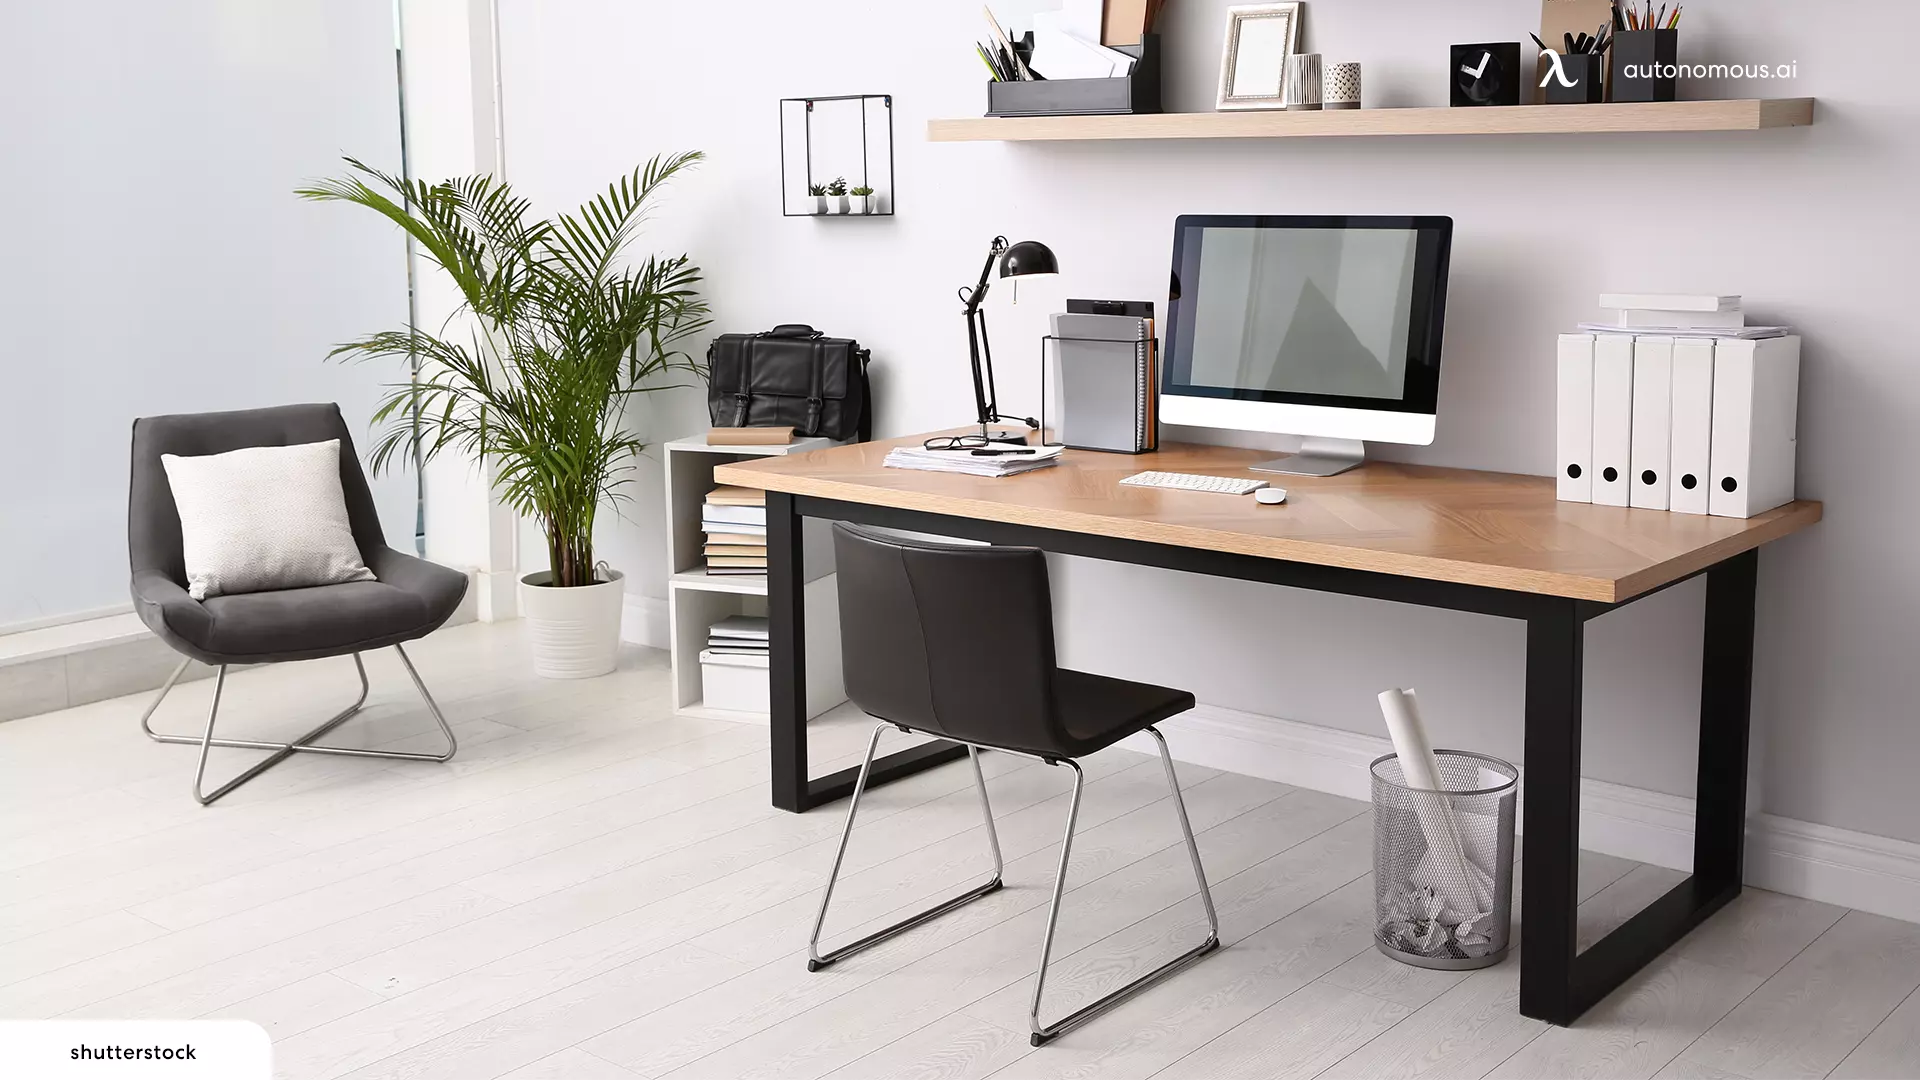 Things to Consider Before Buying an Office Desk with a Hutch